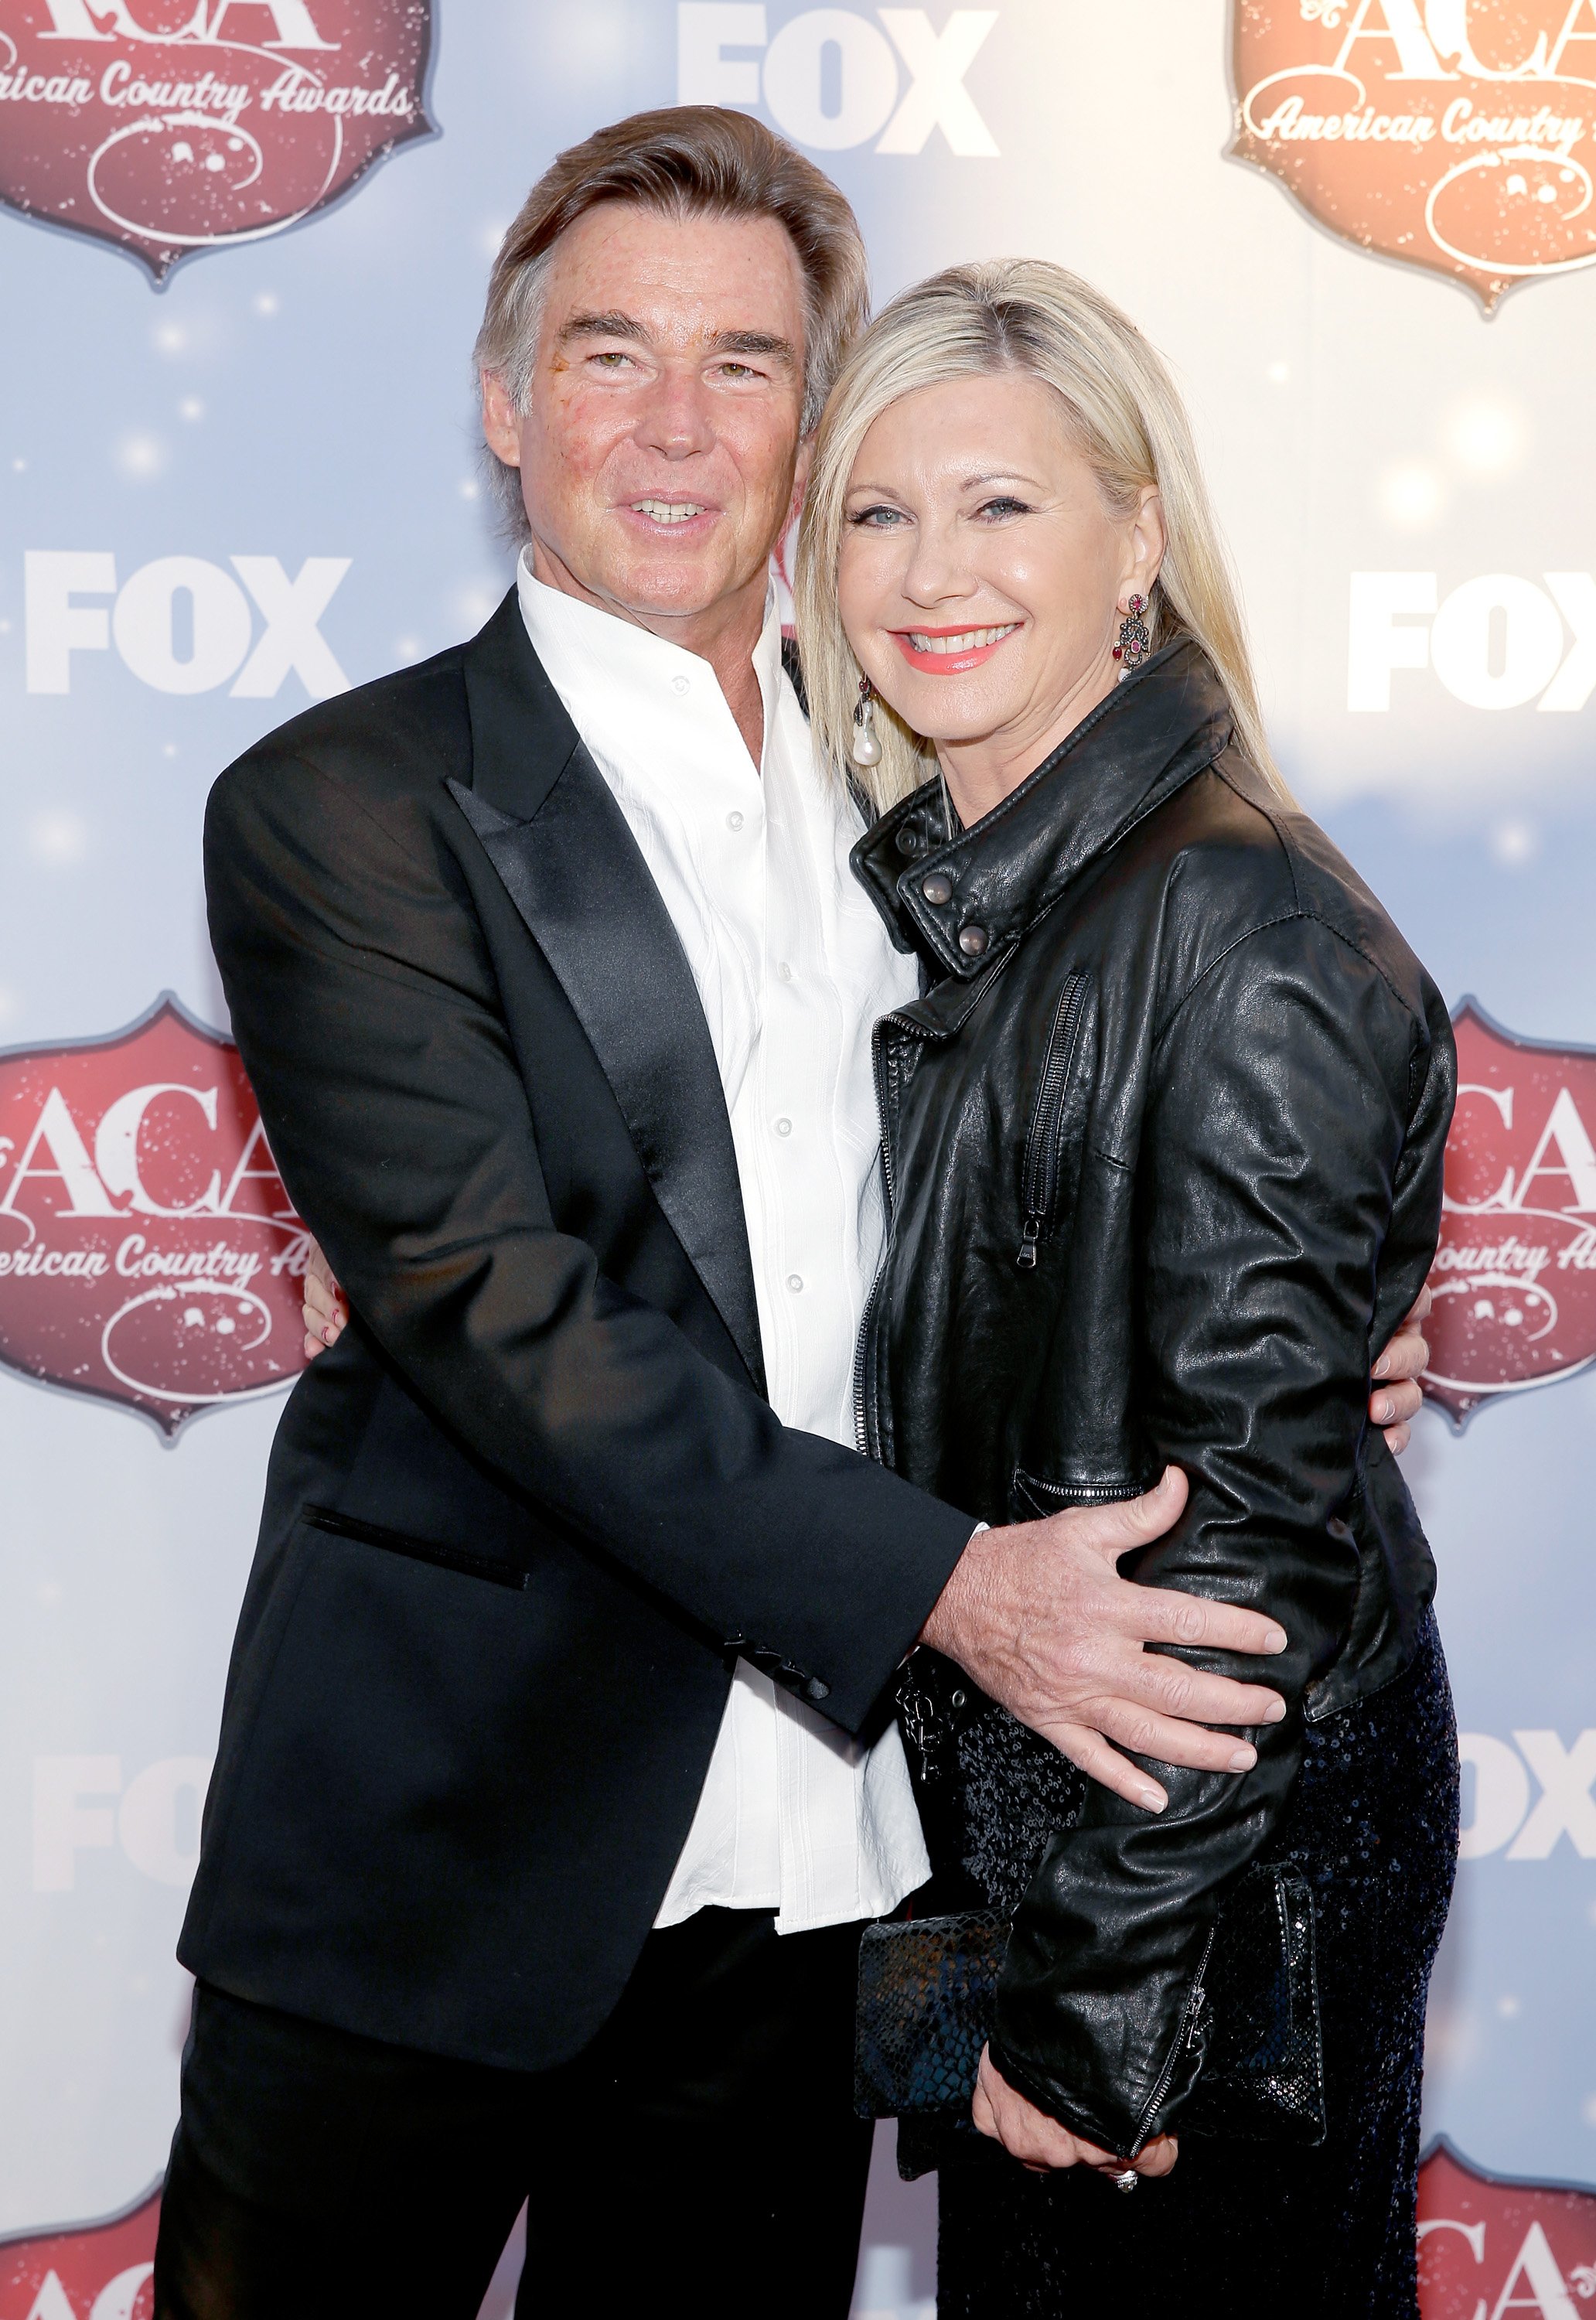 John Easterling and actress Olivia Newton-John arrive at the American Country Awards on December 10, 2013 | Photo: GettyImages